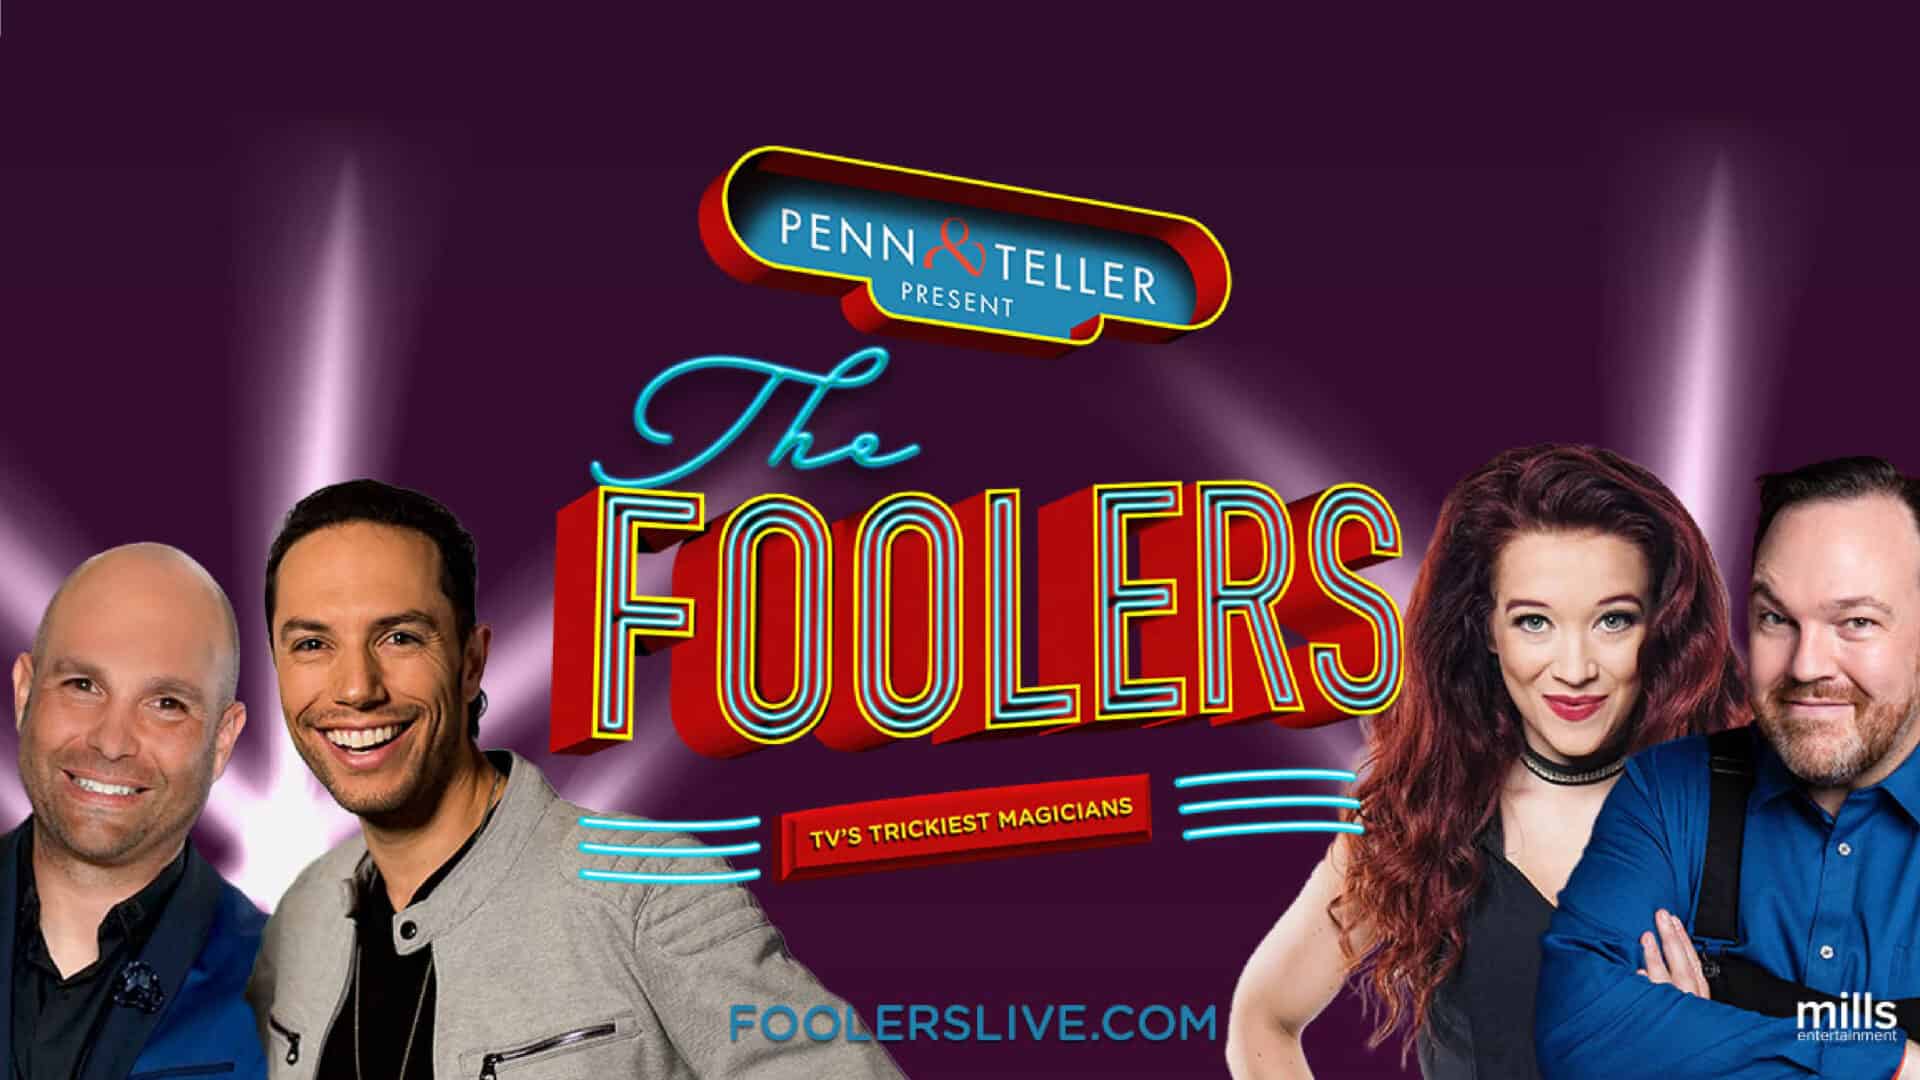 Penn and Teller present The Foolers